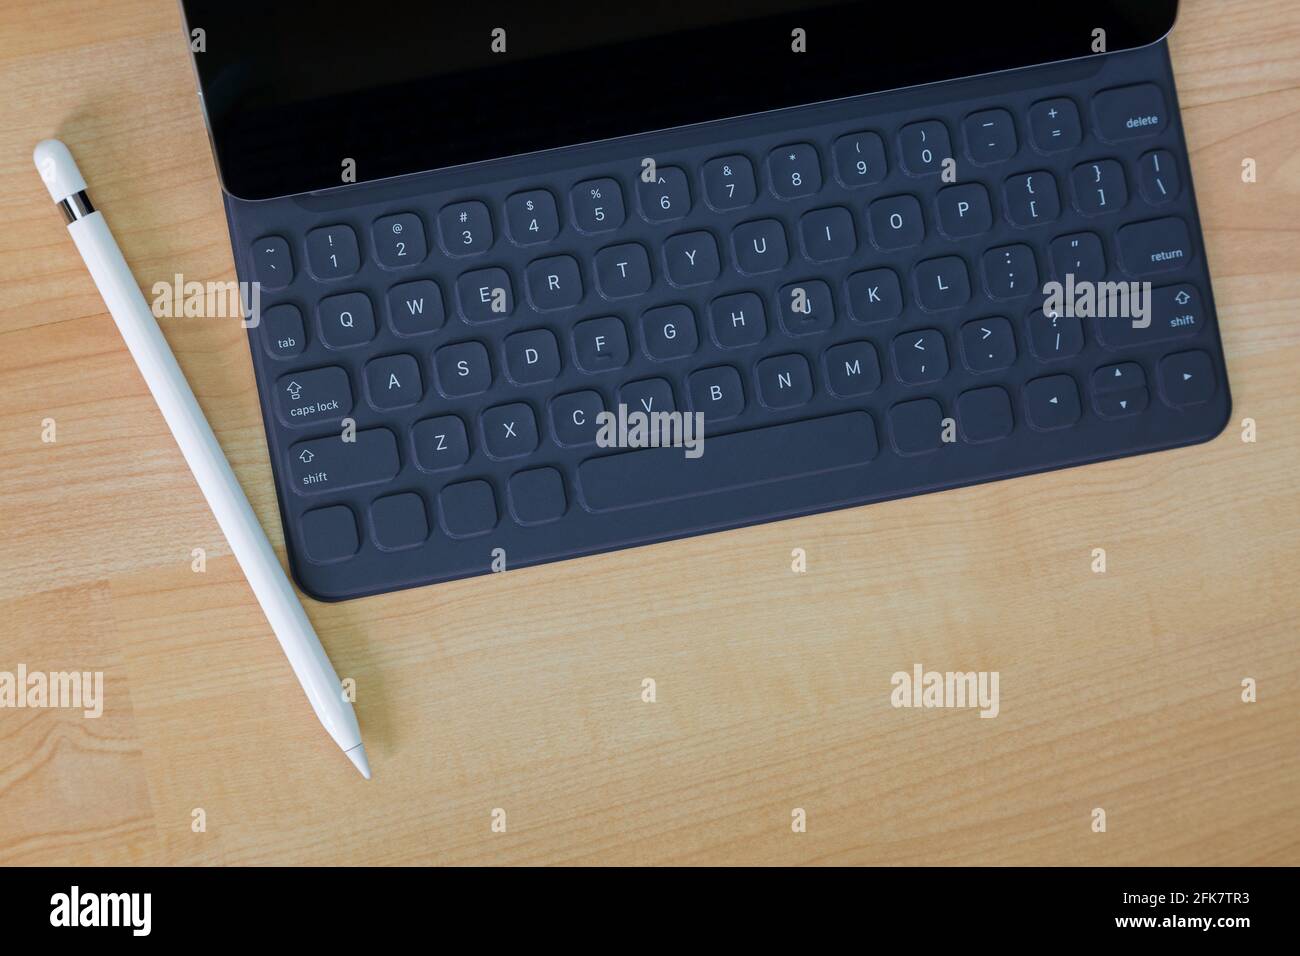 Black pro tablet computer connecting on portable keyboard next to white pencil pen on wooden background with copyspace Stock Photo